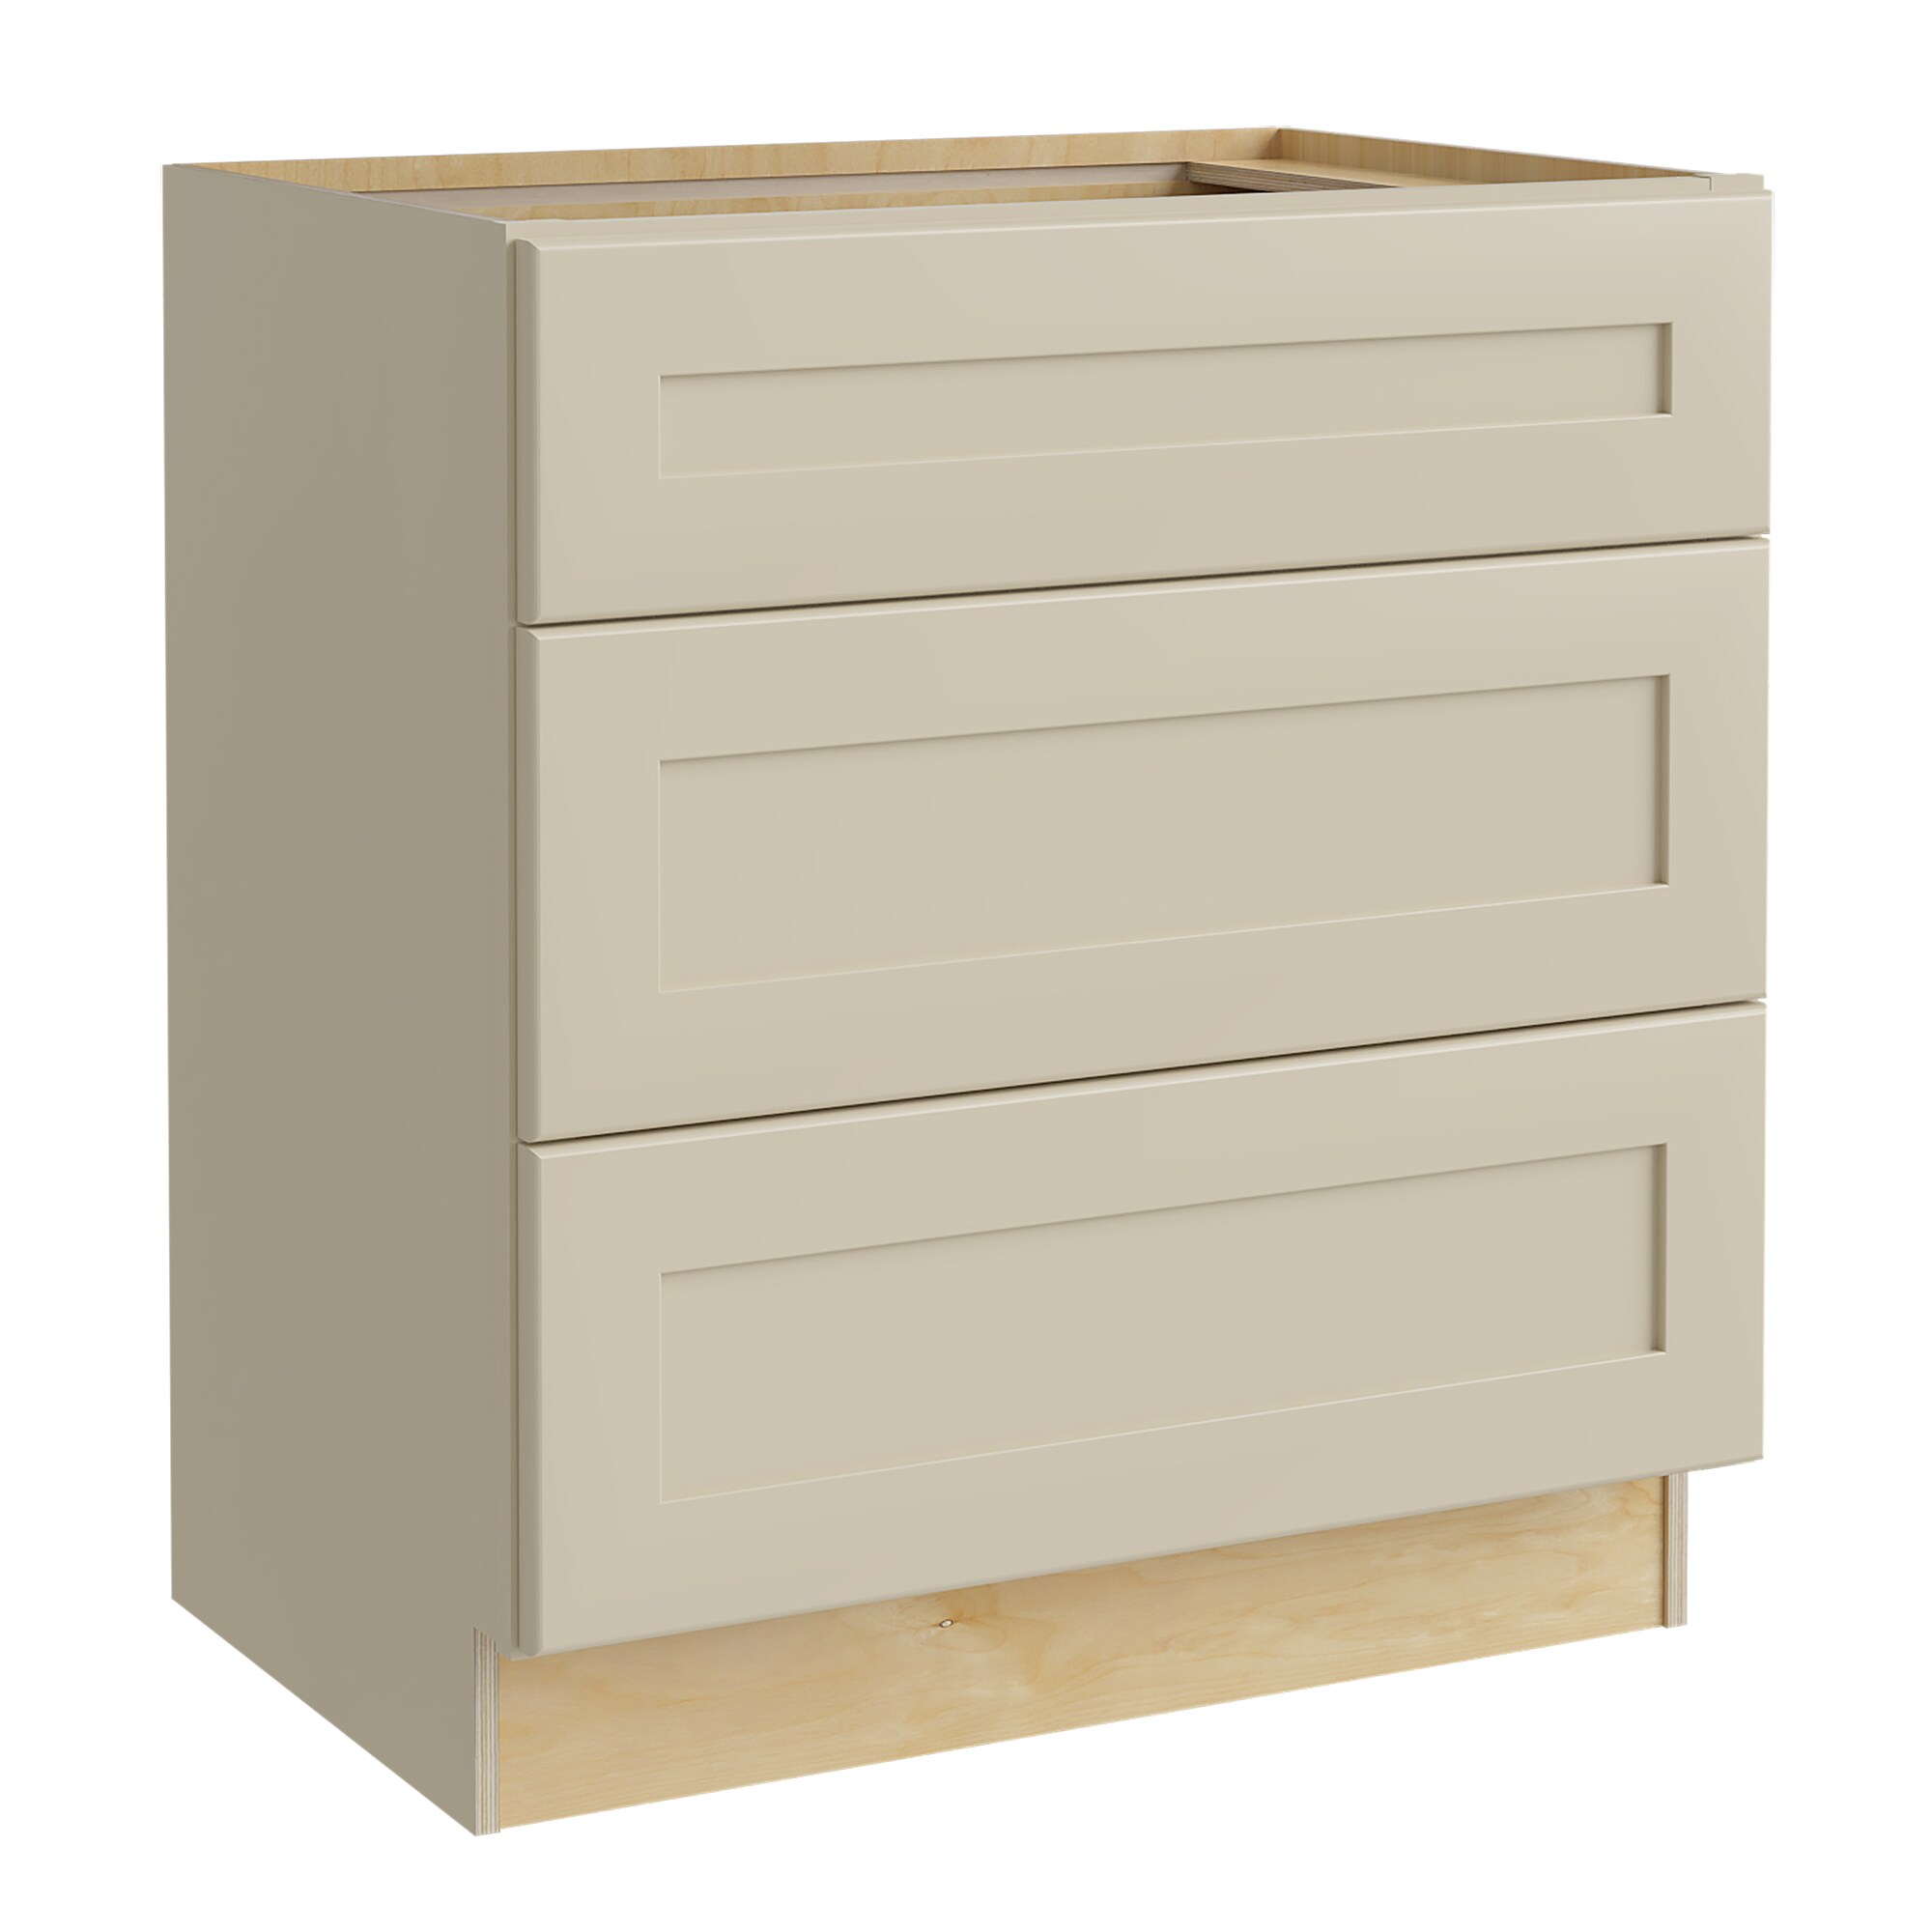 Luxxe Cabinetry 30-in W x 34.5-in H x 24-in D Norfolk Blended Cream Painted Drawer Base Fully Assembled Semi-custom Cabinet in Off-White | BD30-NBC